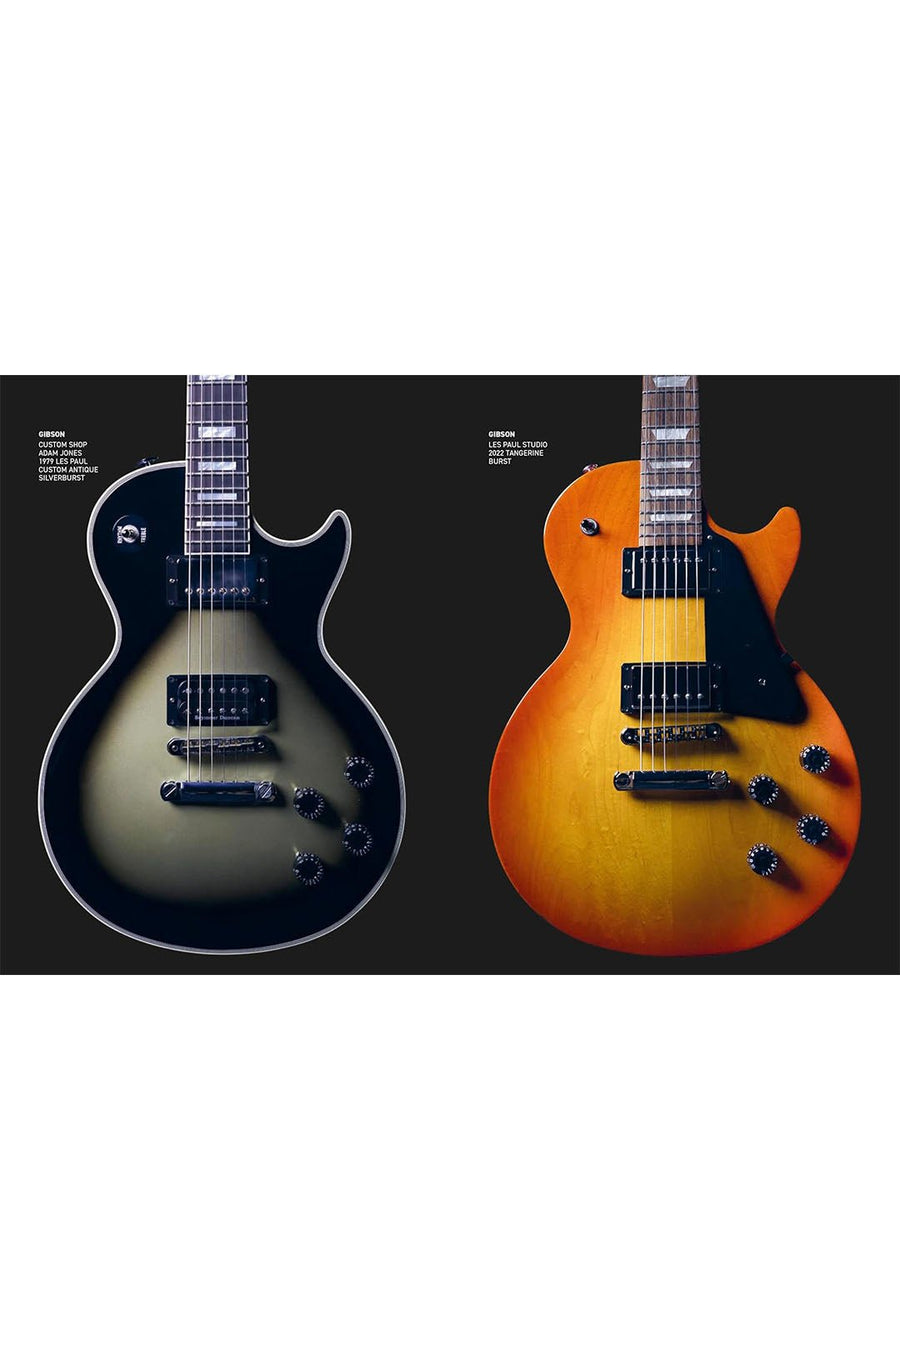 LES PAUL - 70 YEARS - Burning Torch Online Boutique